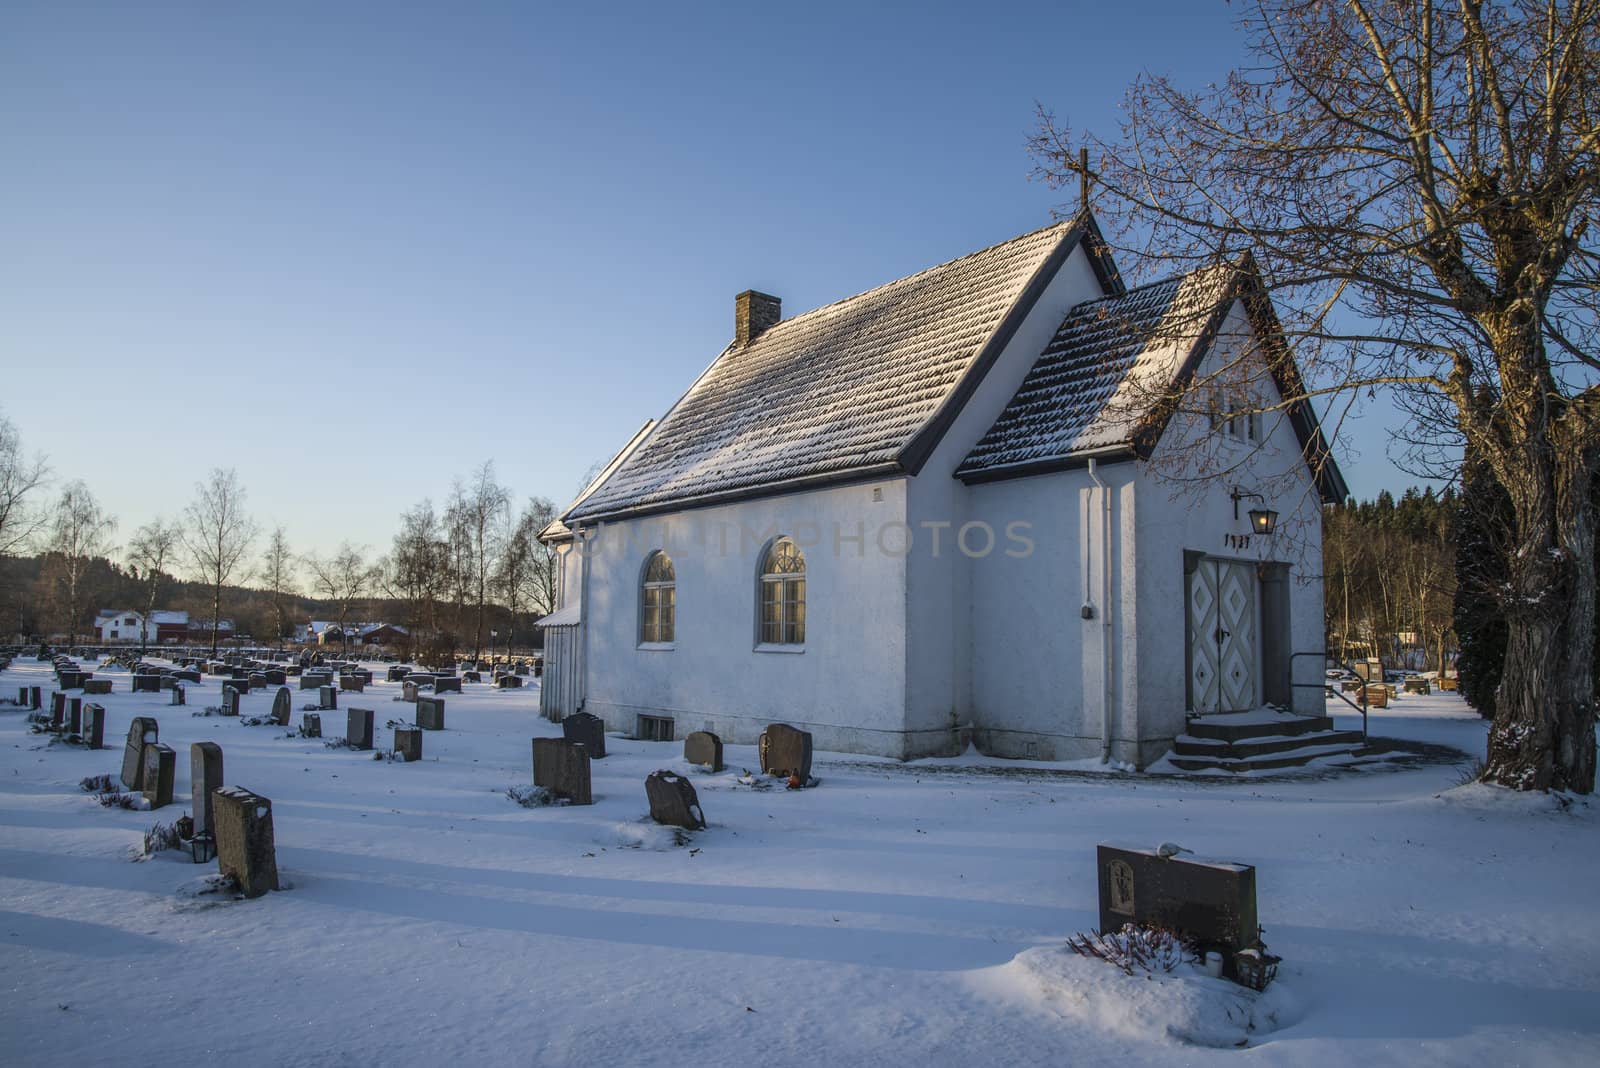 Idd church in winter, the chapel by steirus